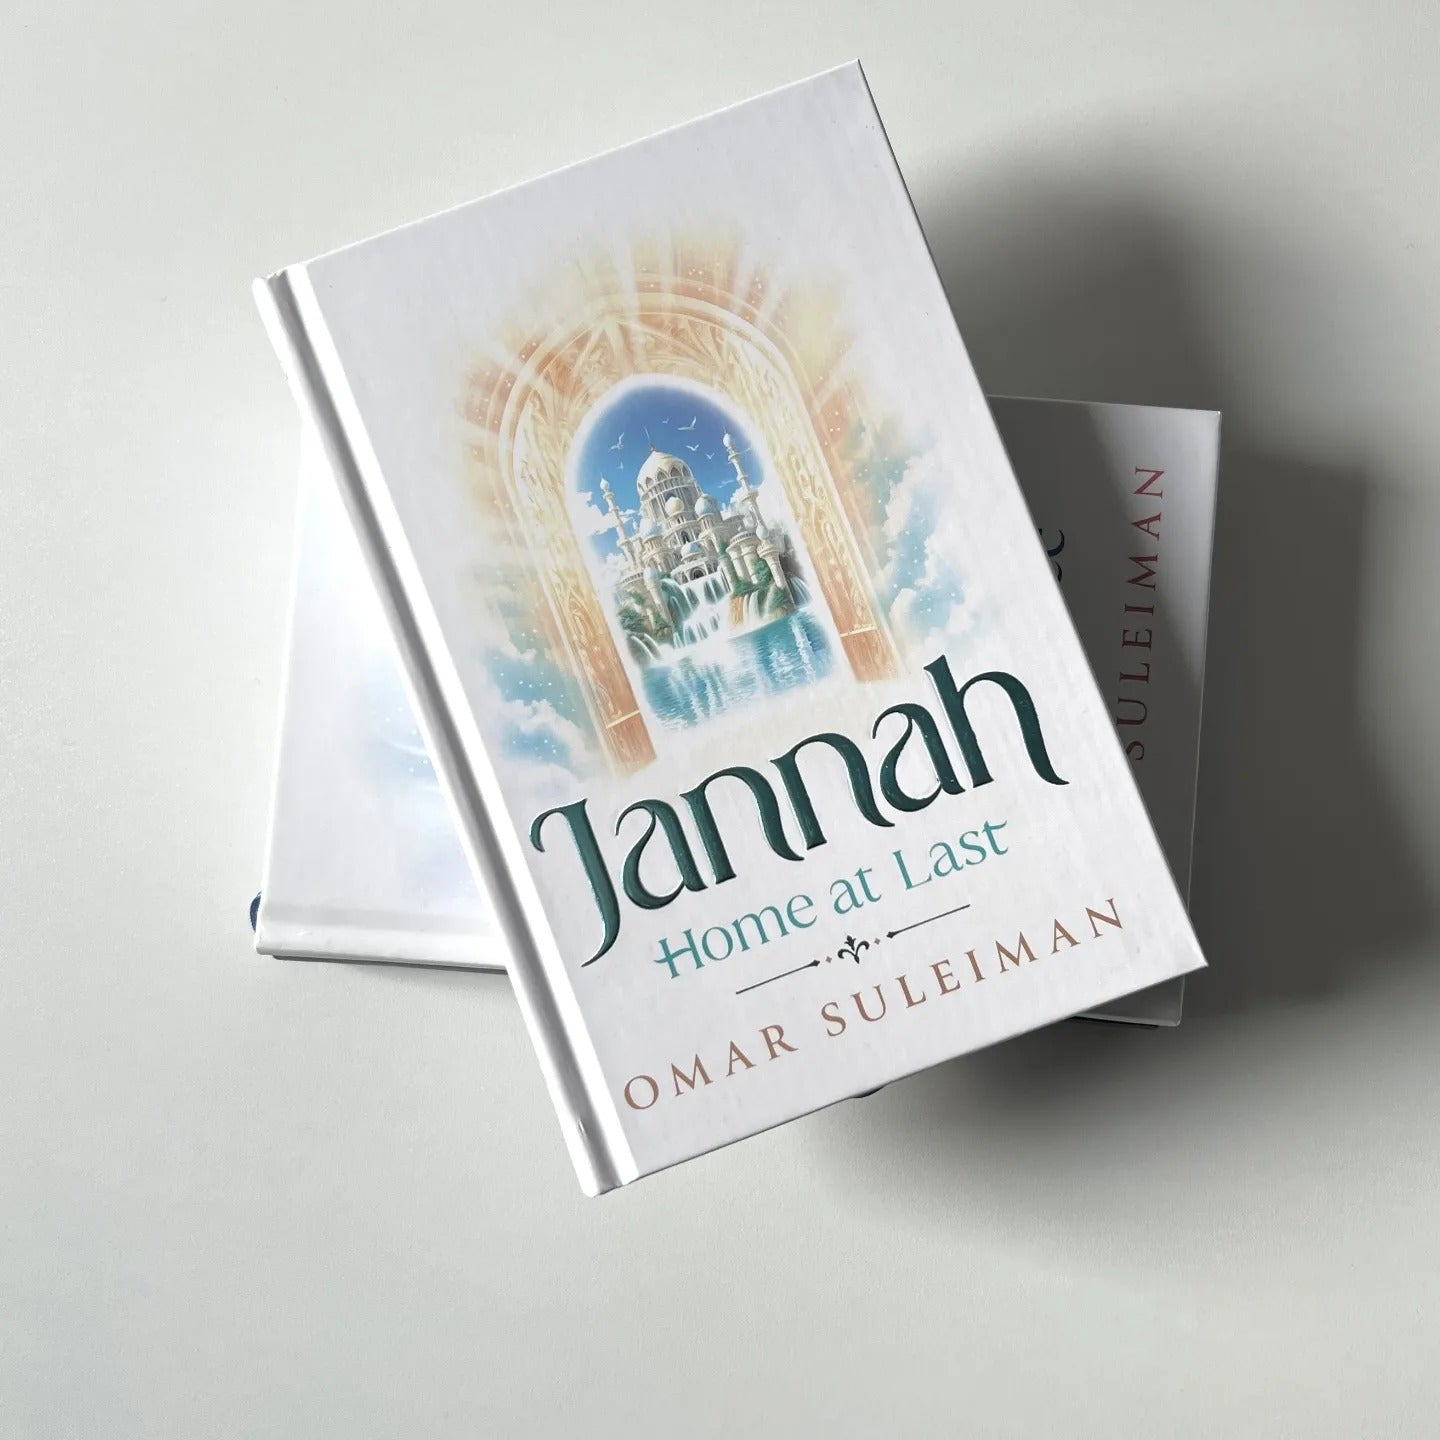 Jannah - Home at Last by Omar Suleiman